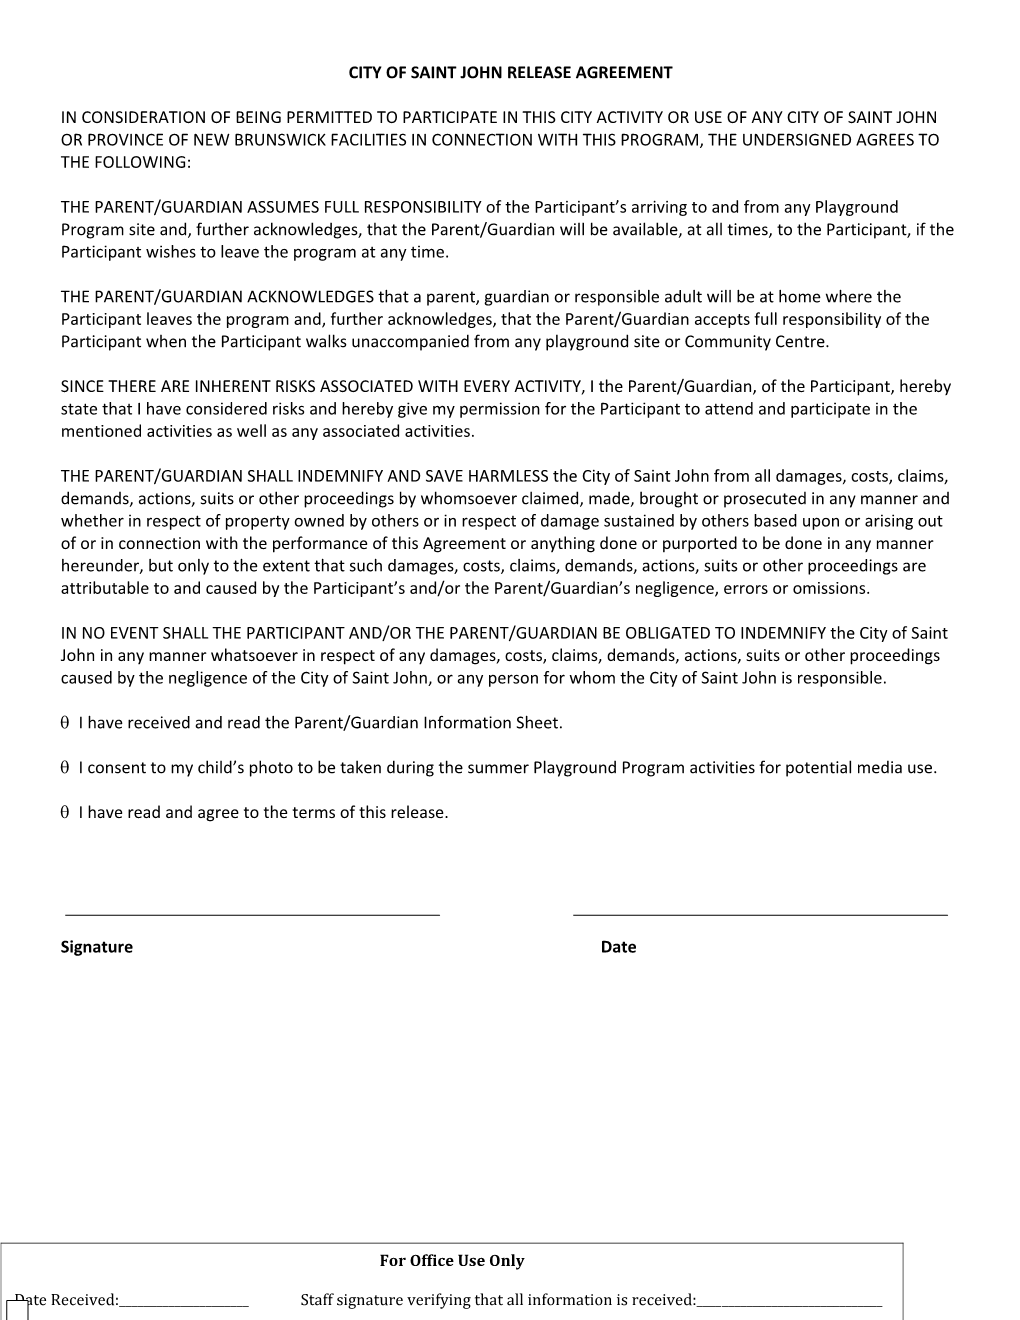 Registration and Release Agreement